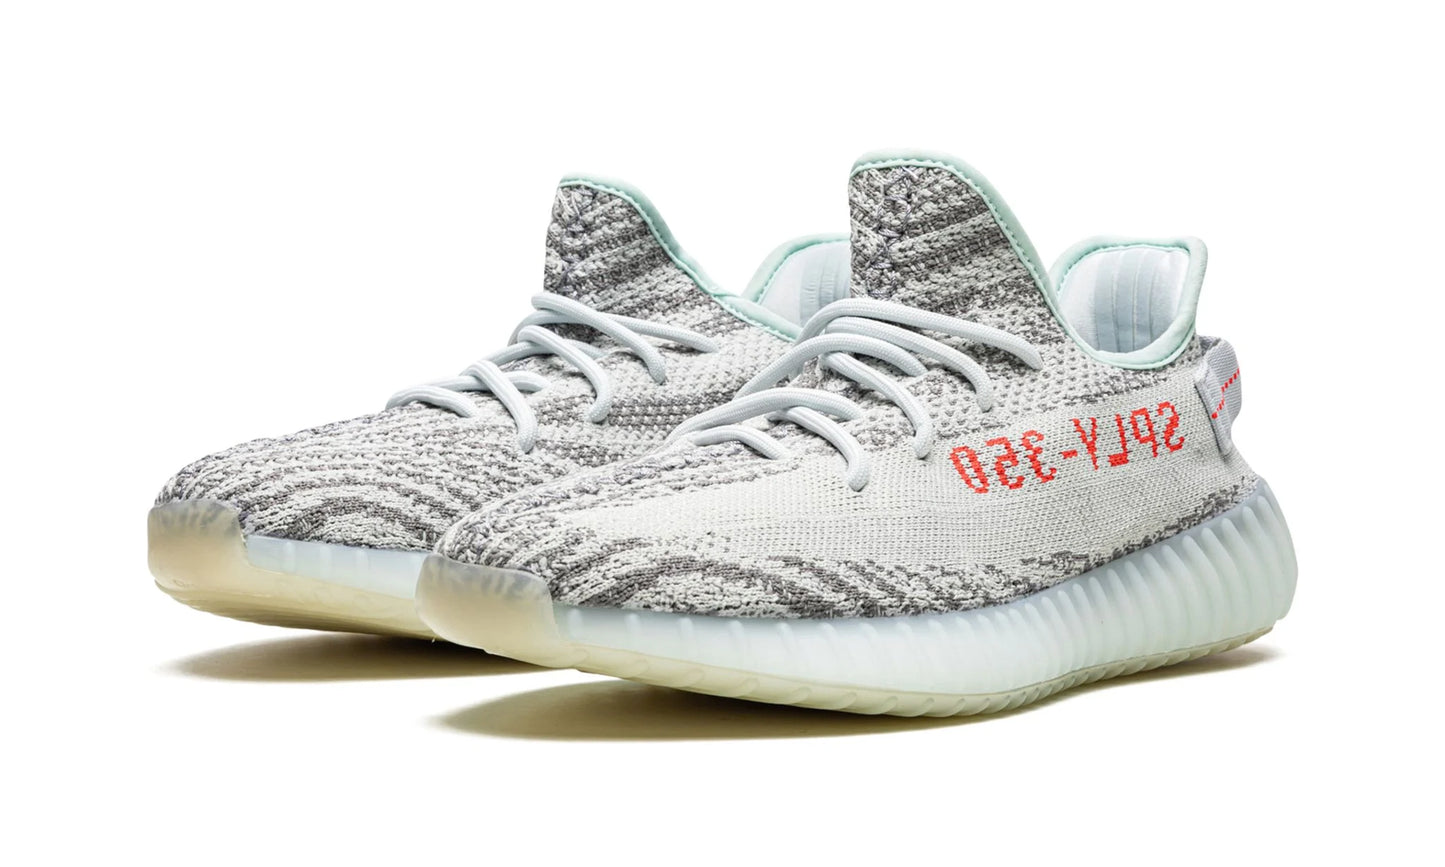 Adidas Yeezy 350 V2 Blue Tint Front View